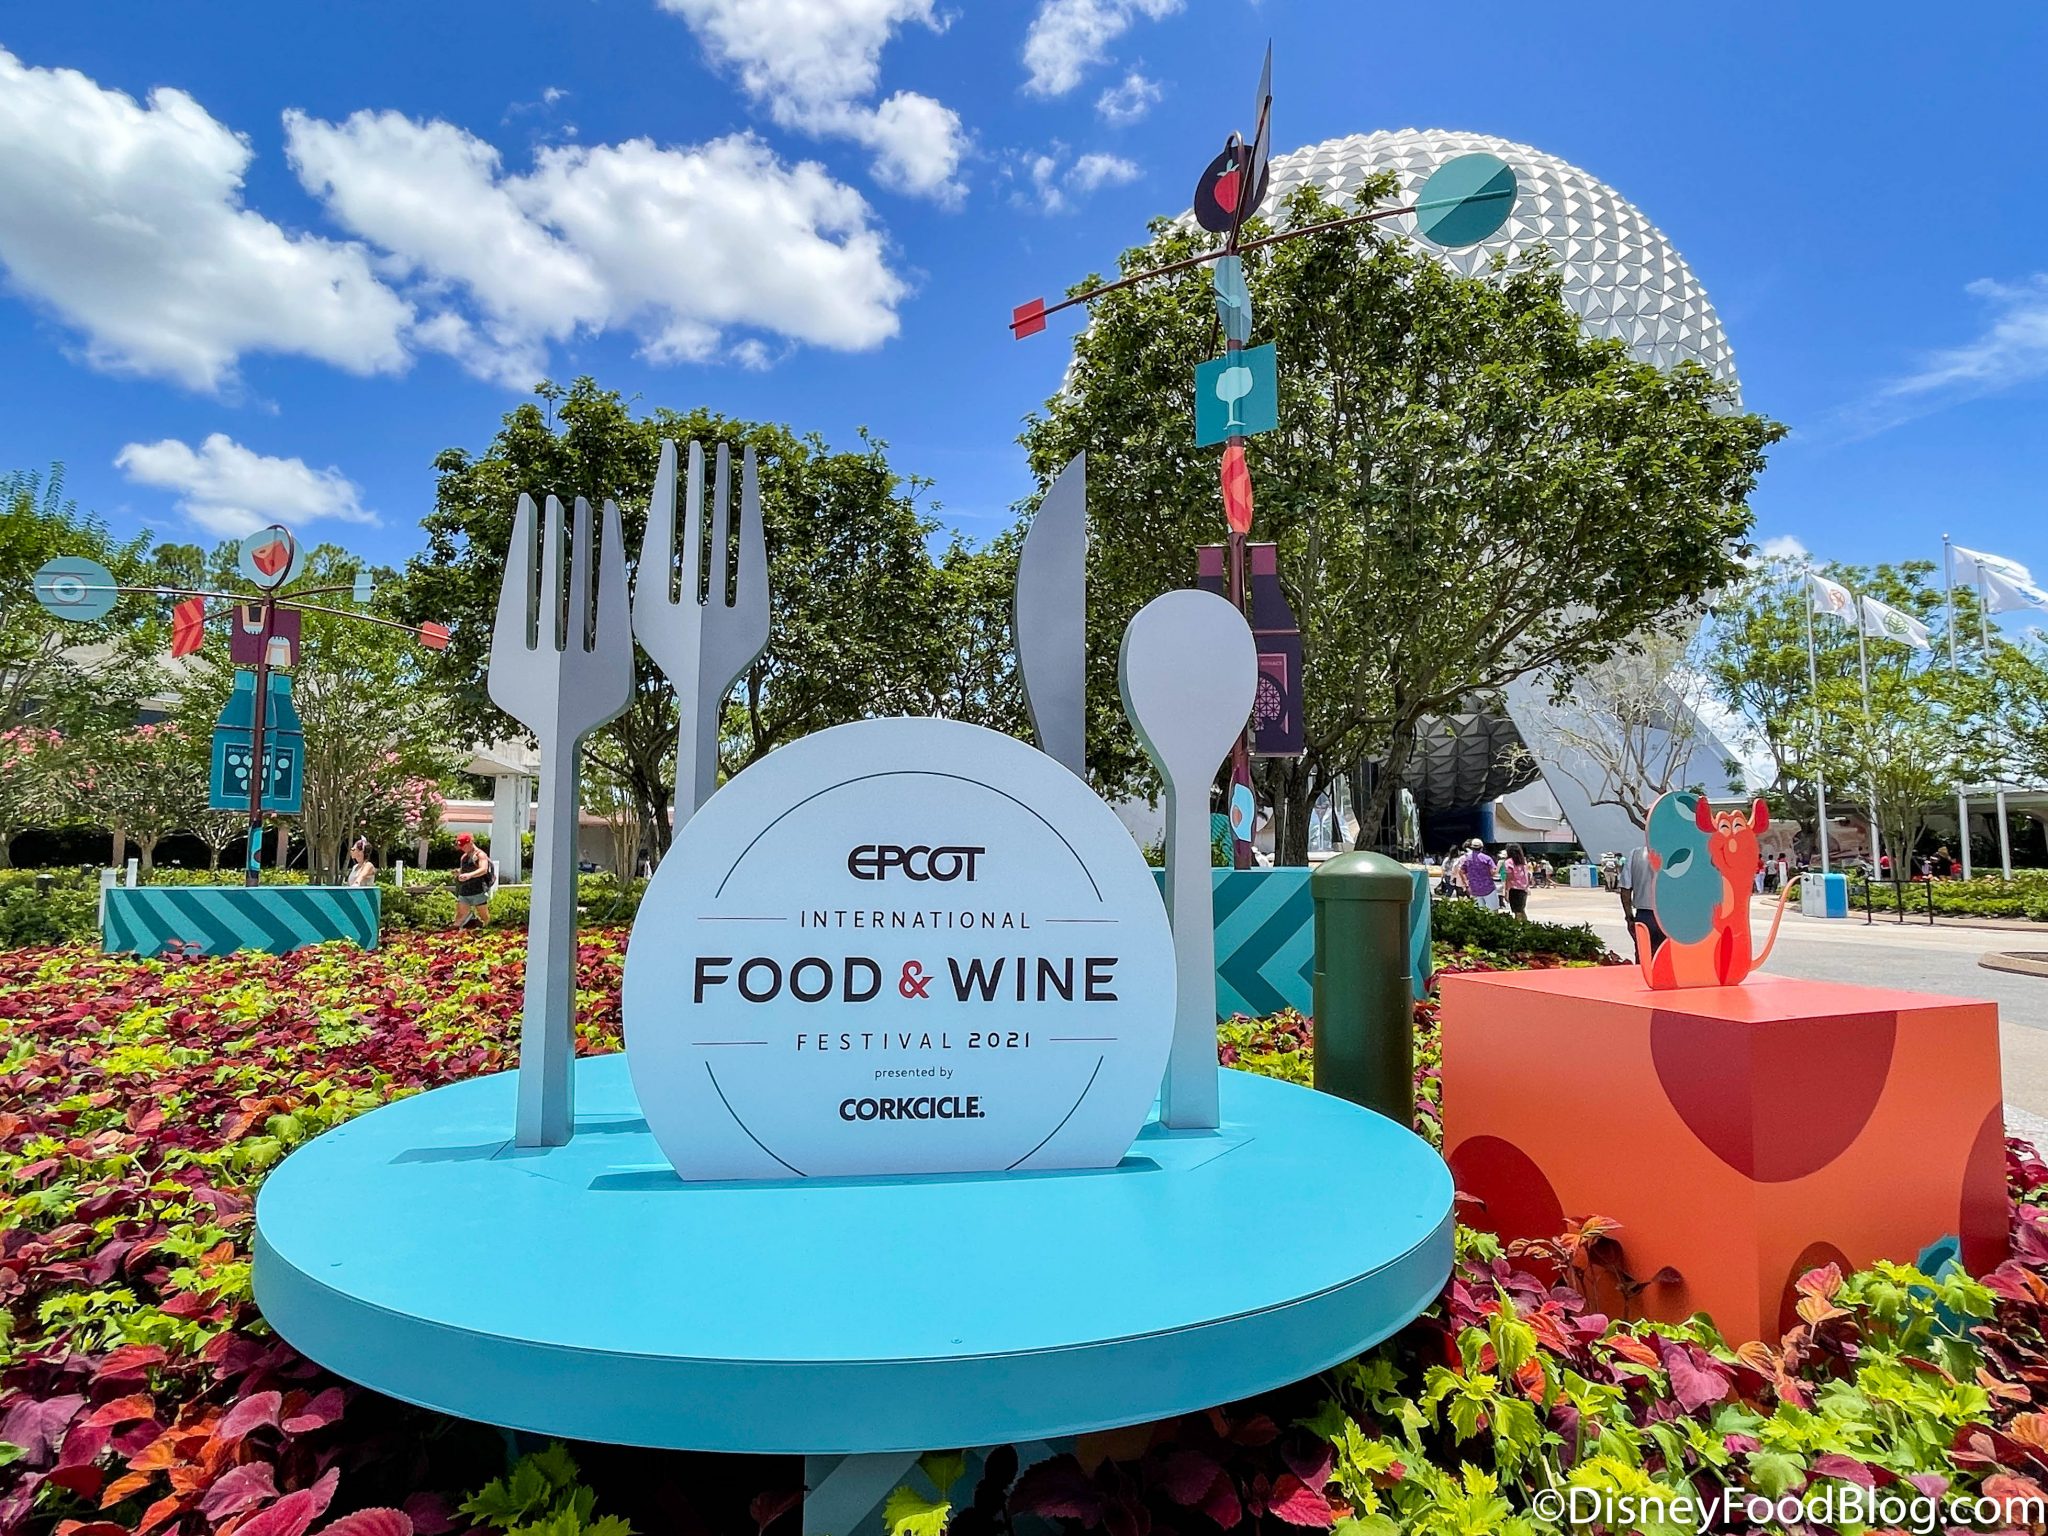 Why Isn’t This HUGE Space Being Used for 2021 EPCOT Food and Wine